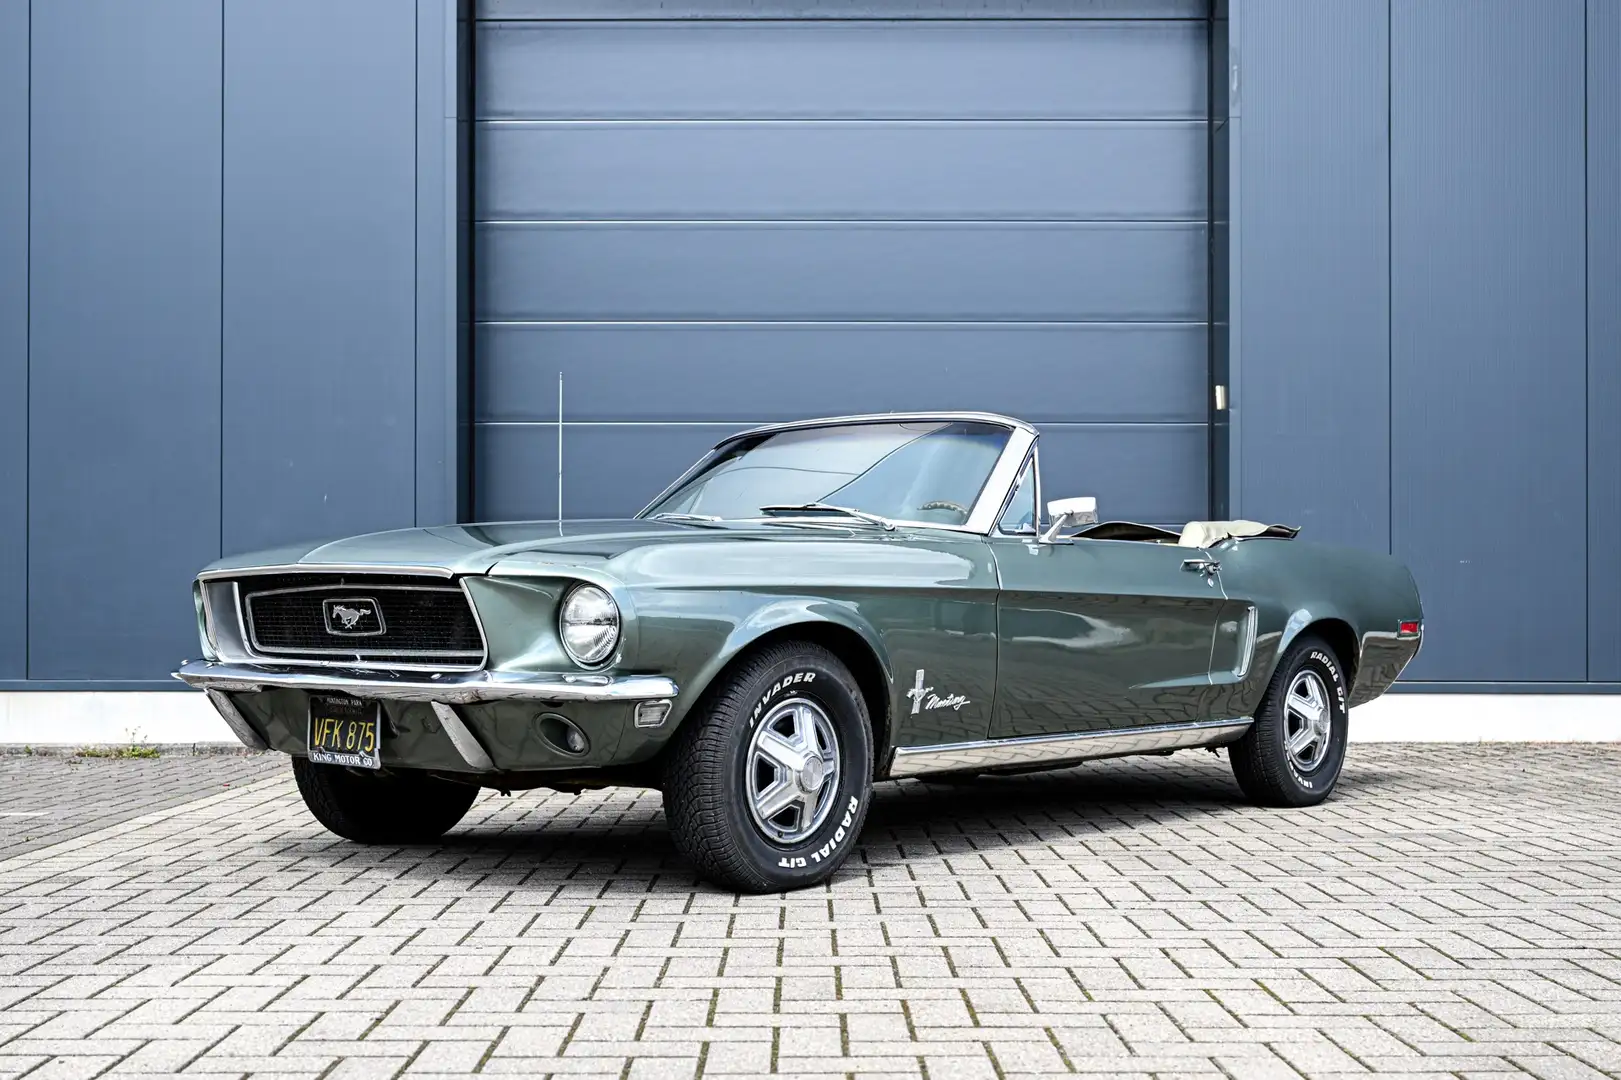 Ford Mustang CABRIO - OLDTIMER - 1967 Green - 1